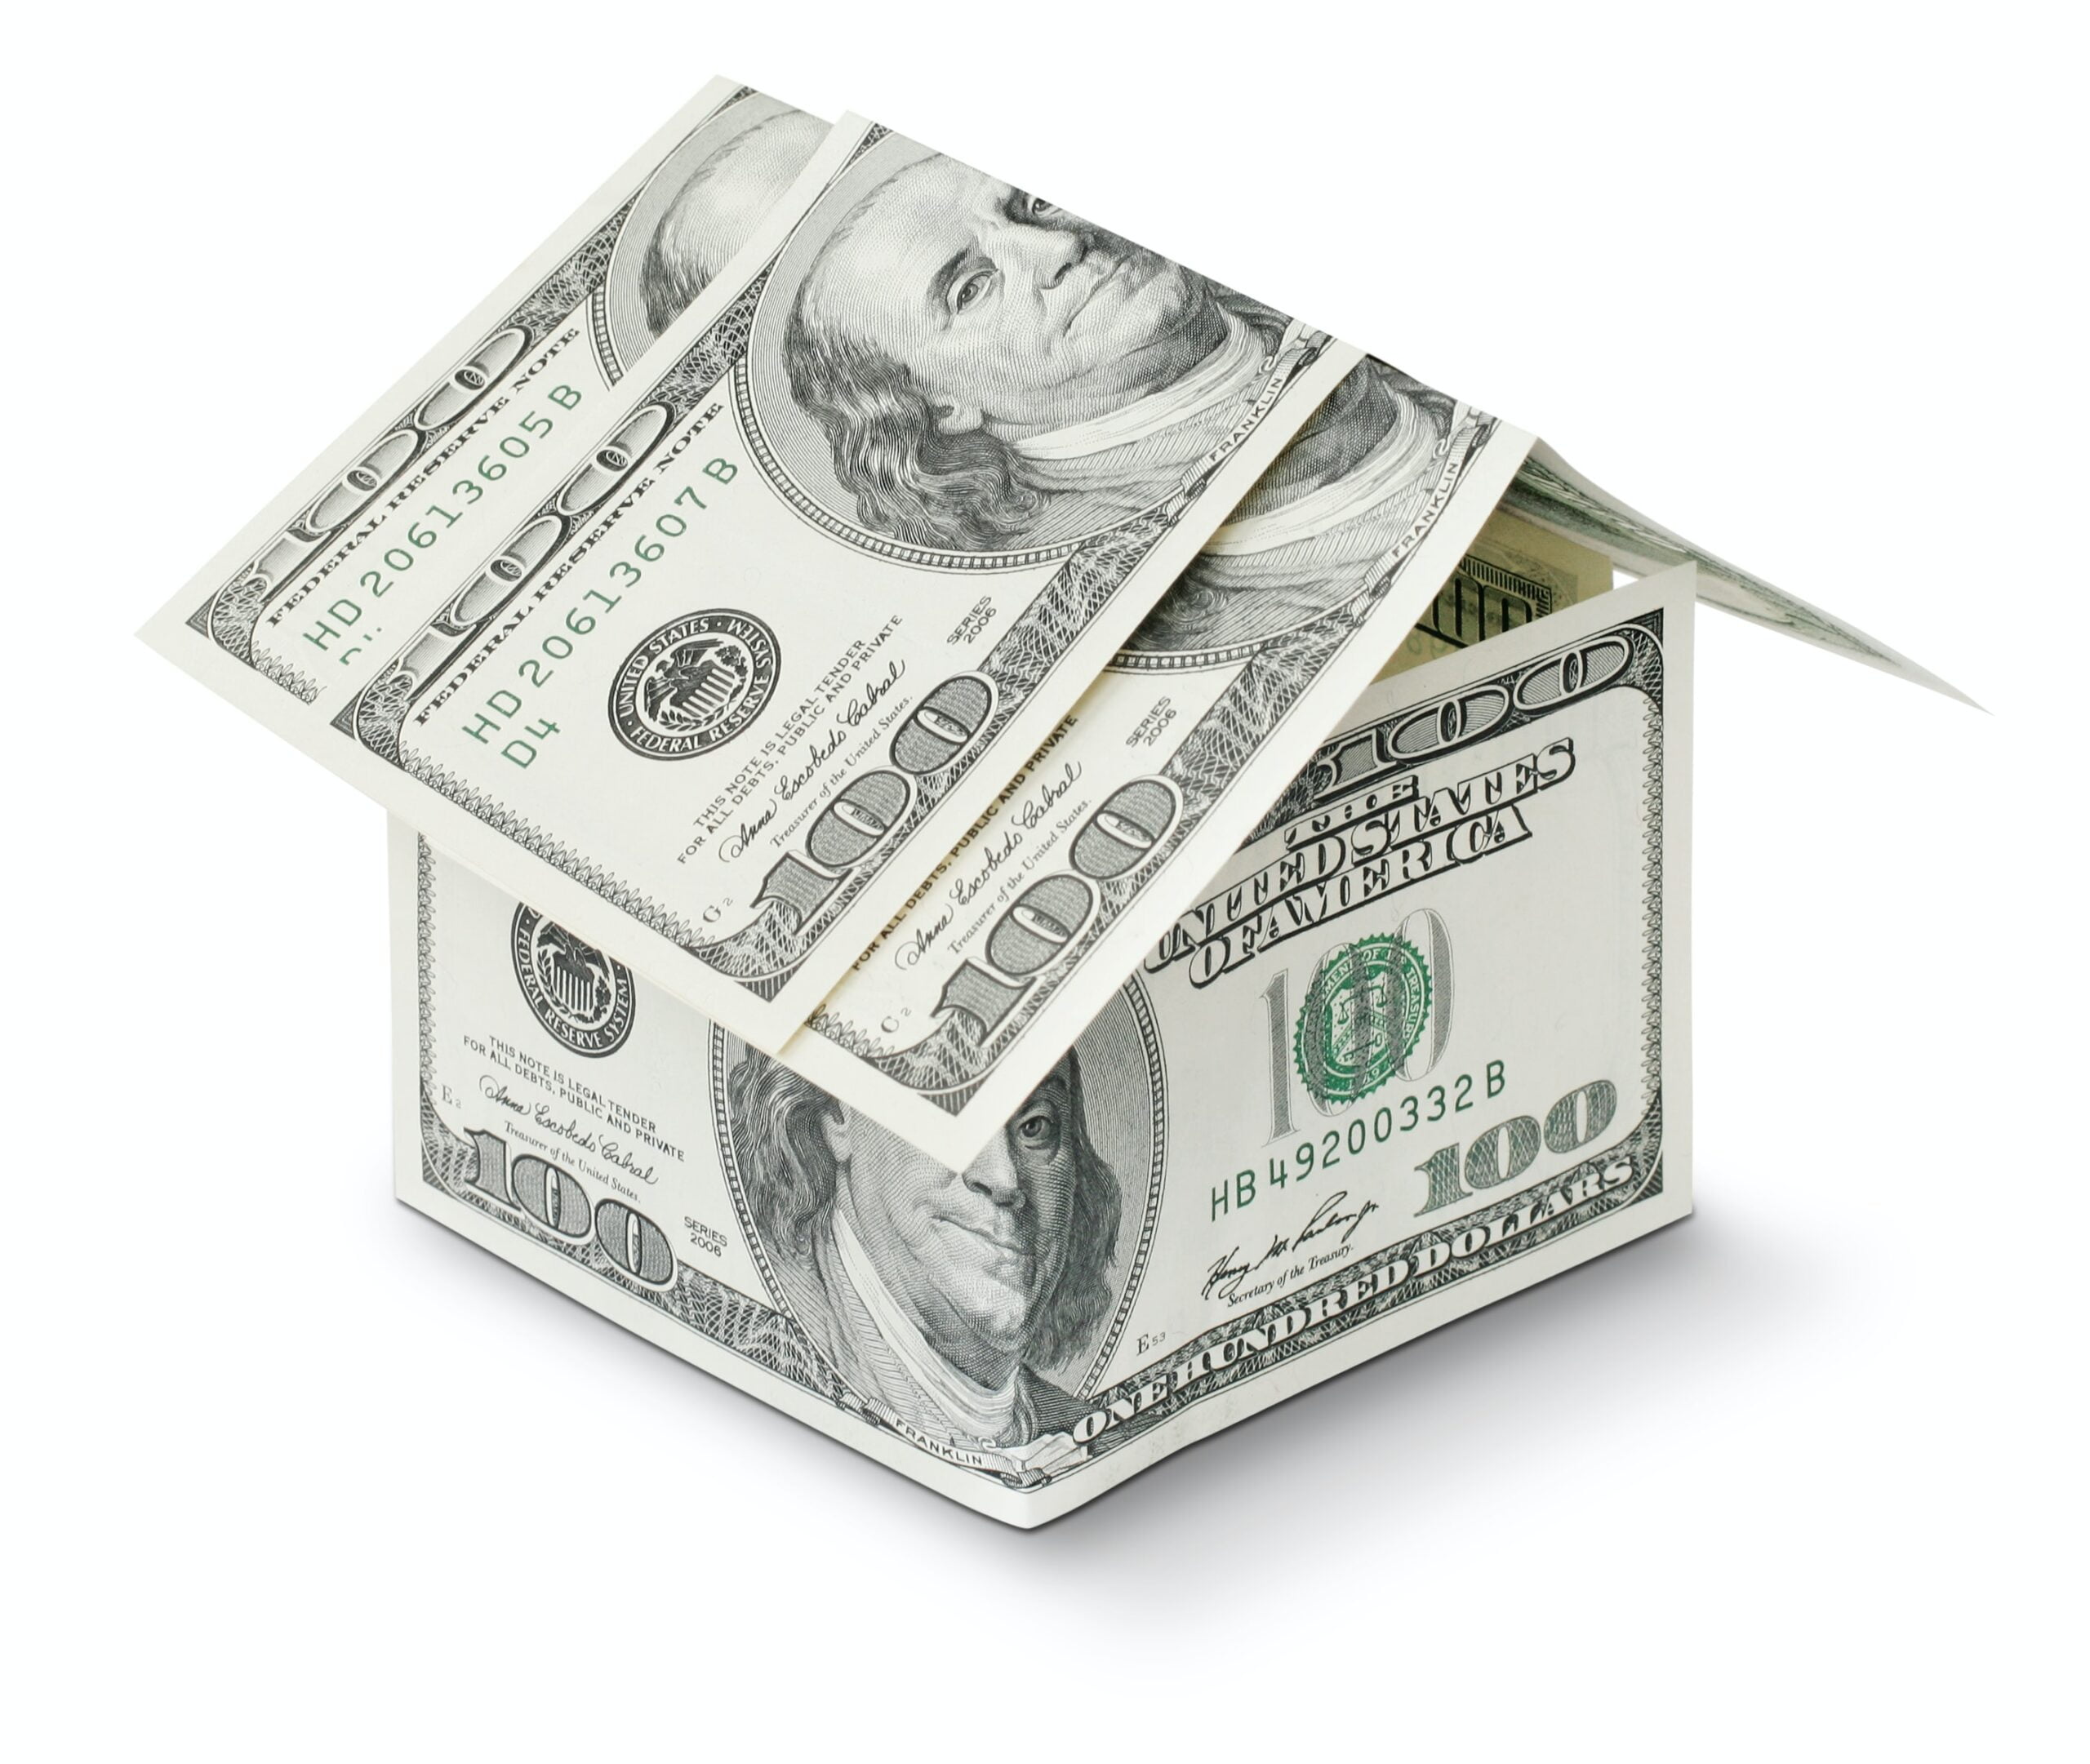 A simple house structure made made out of $100 bills. Cover image for an article covering groundfloor, groundfloor labs, ground floor notes, groundfloor real estate, and groundfloor investing.